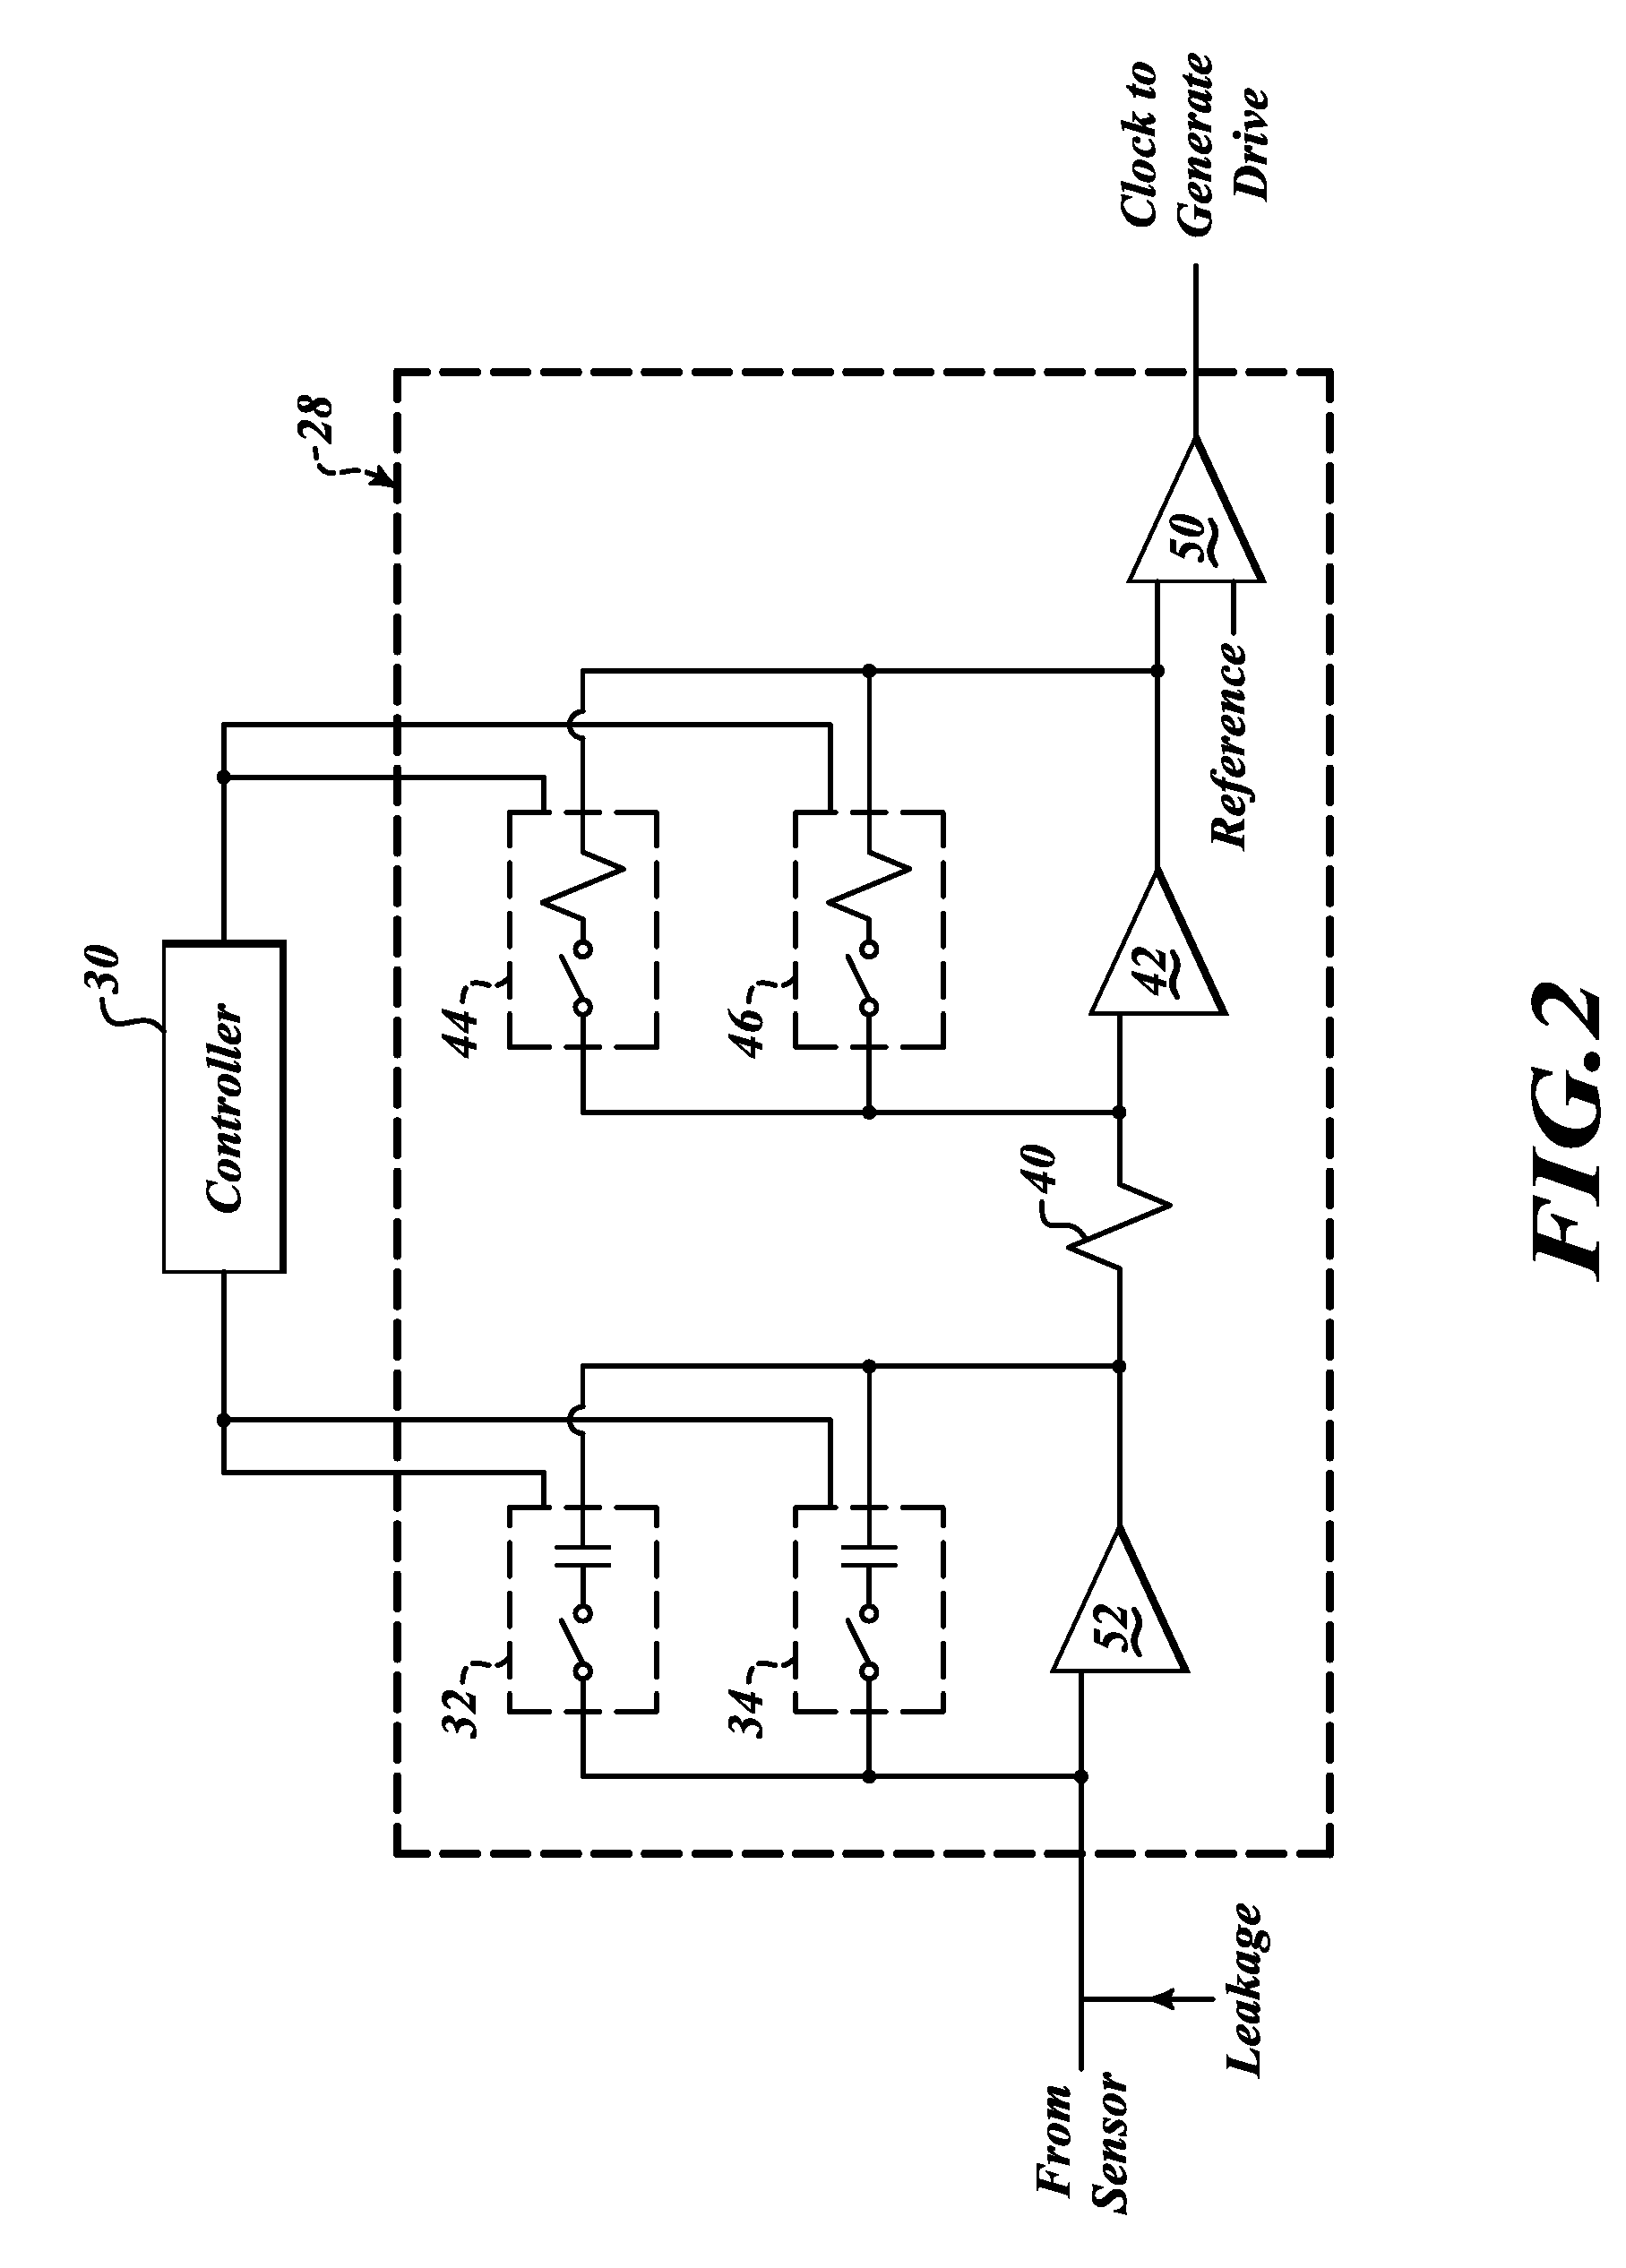 Systems and methods to overcome DC offsets in amplifiers used to start resonant micro-electro mechanical systems